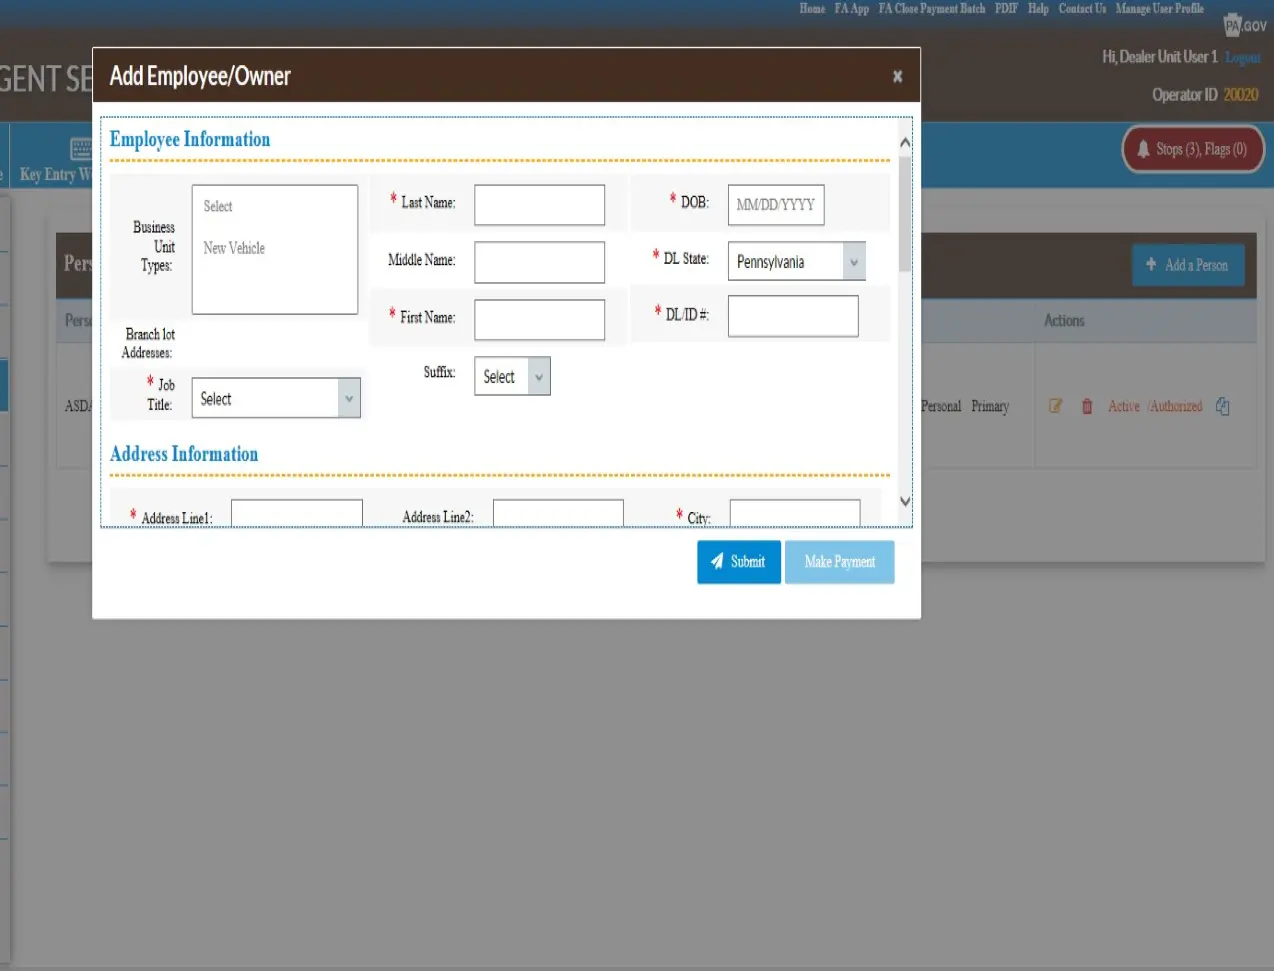 A screen shot of a blank employee information screen within the online Dealer Agent System.